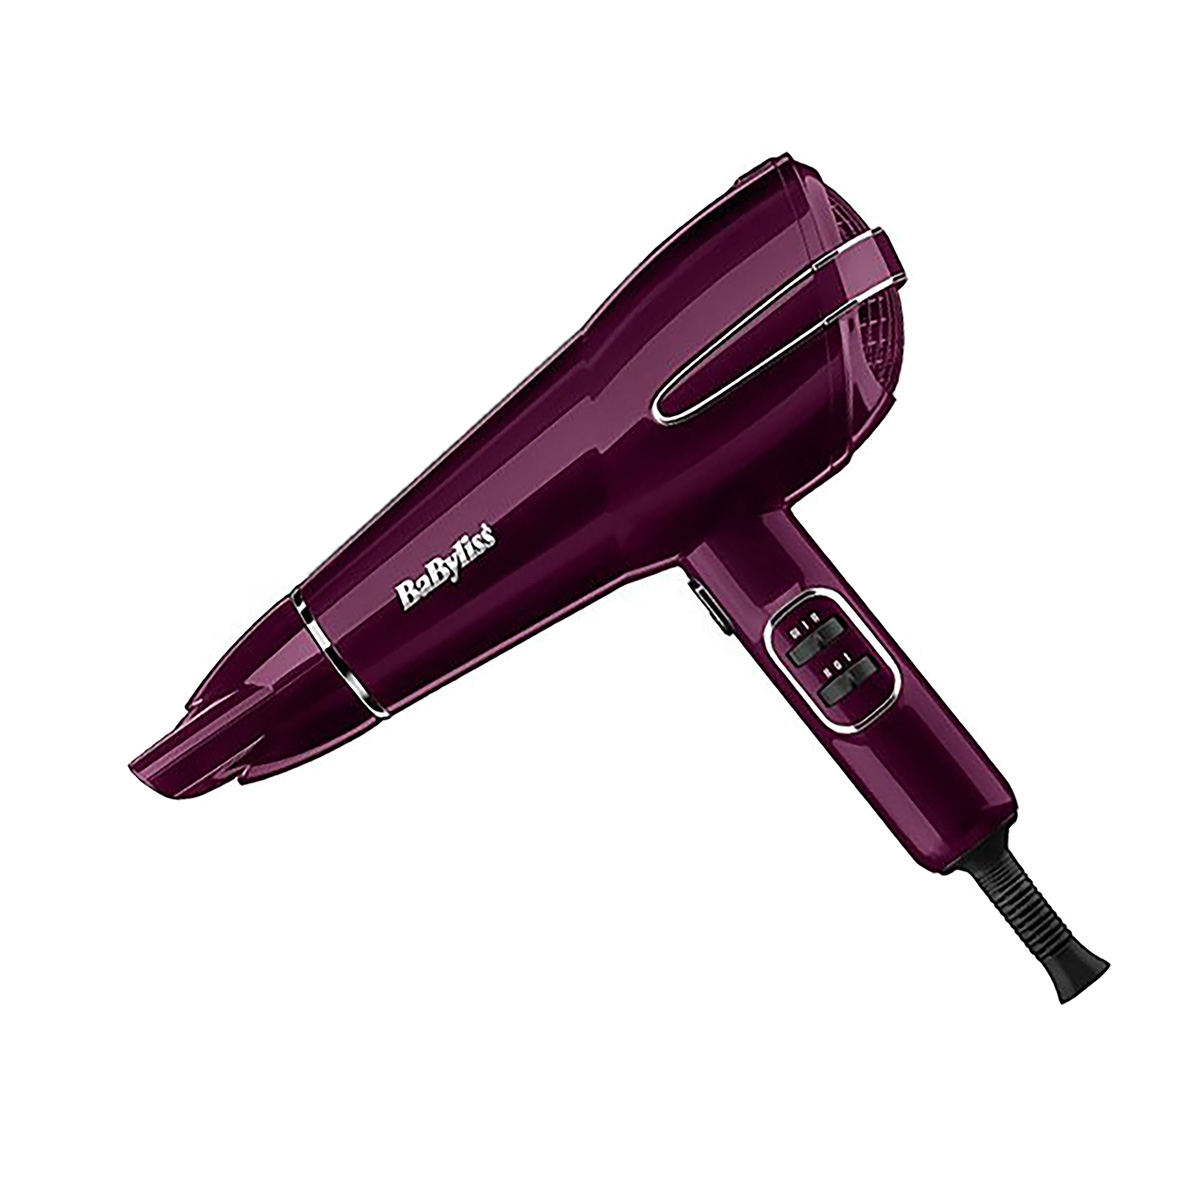 Order for € from Beautybuys Ireland - Babyliss Elegance 2100W Hair  Dryer 5560KU is a lightweight, fast-drying hair dryer, featuring ionic  frizz-control and advanced airflow technology, 3 heat settings, 2 speed  settings,